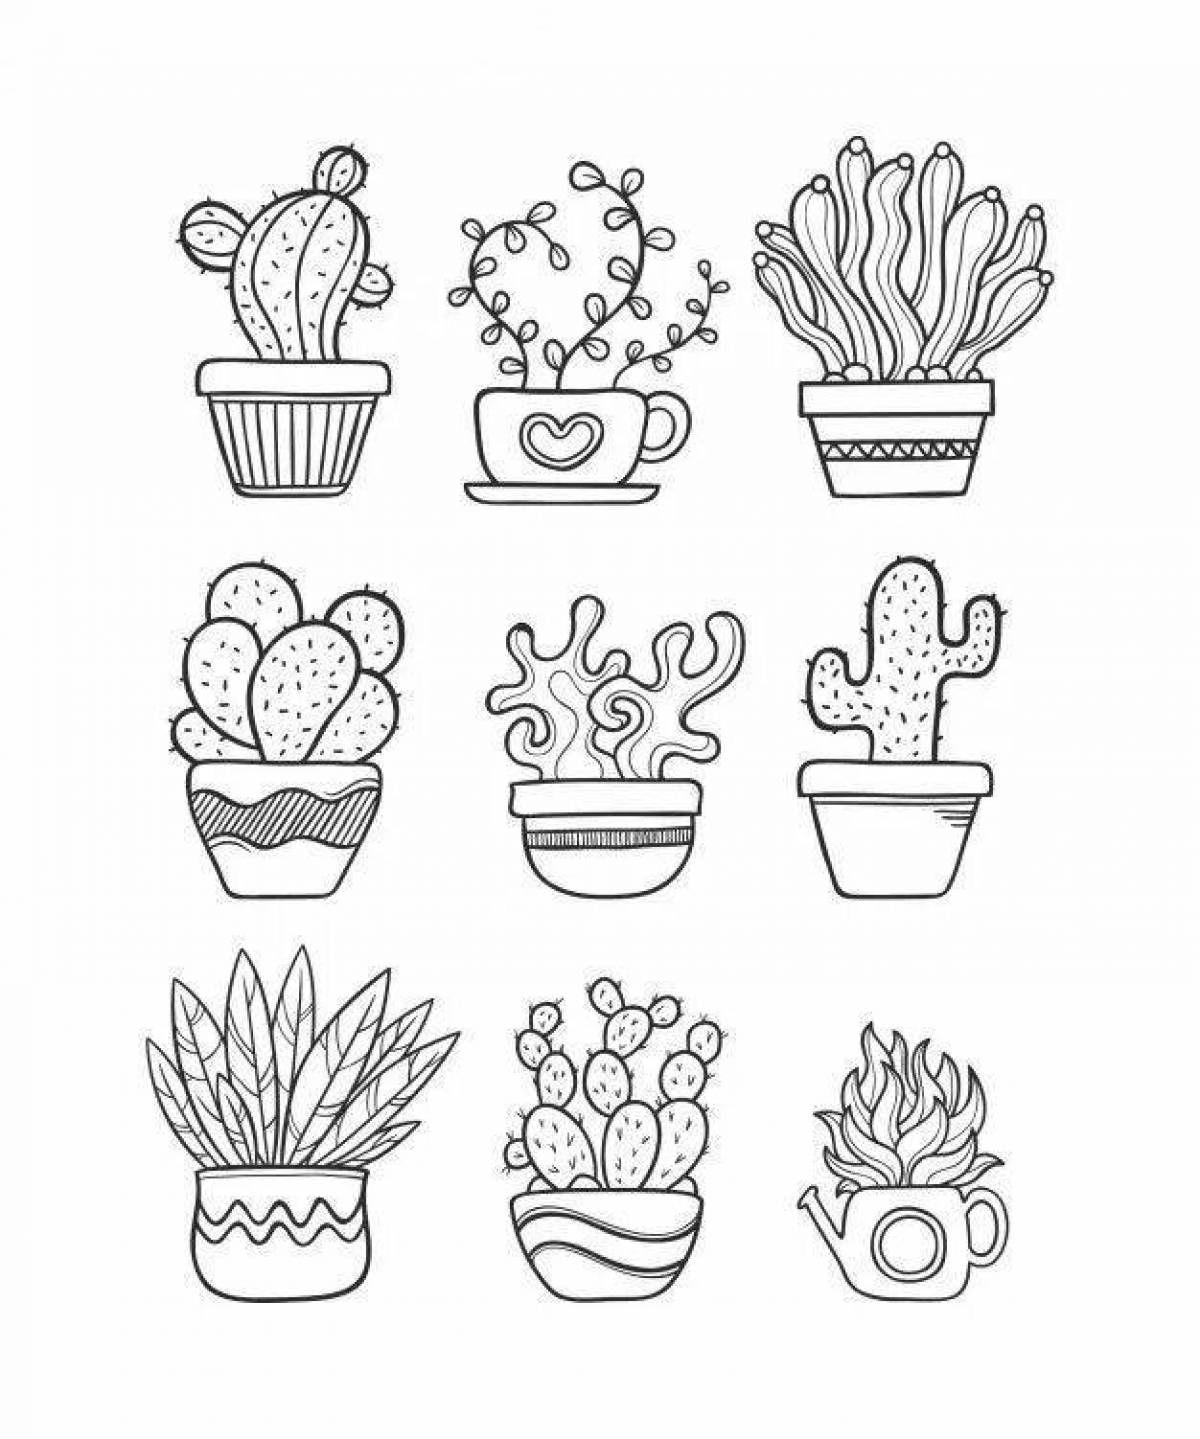 Charming cactus coloring book